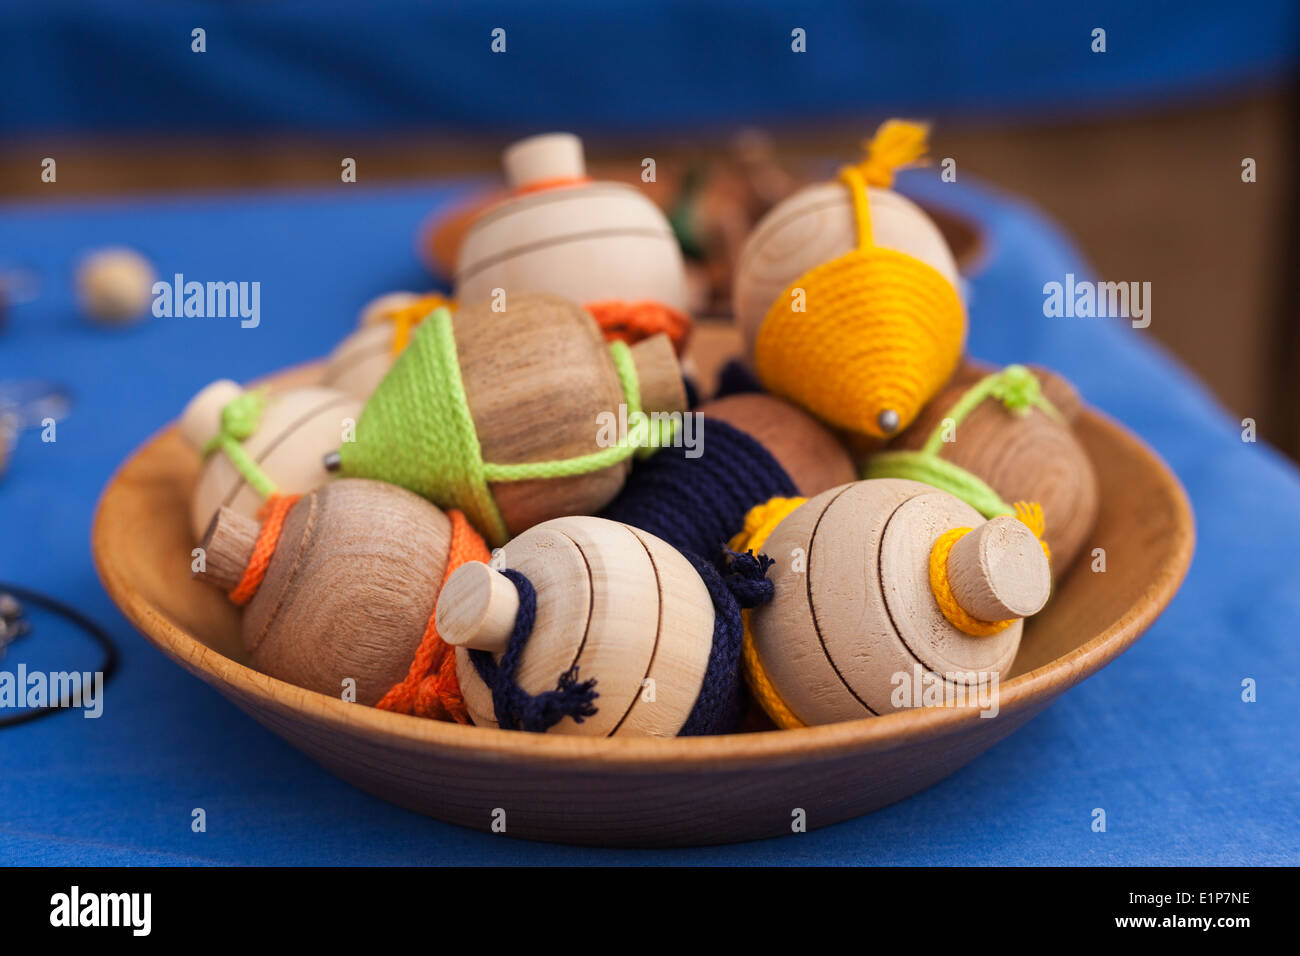 Traditional wooden spinning tops on sale at a craftworks stall in Tenerife, Canary Islands, Spain. Stock Photo